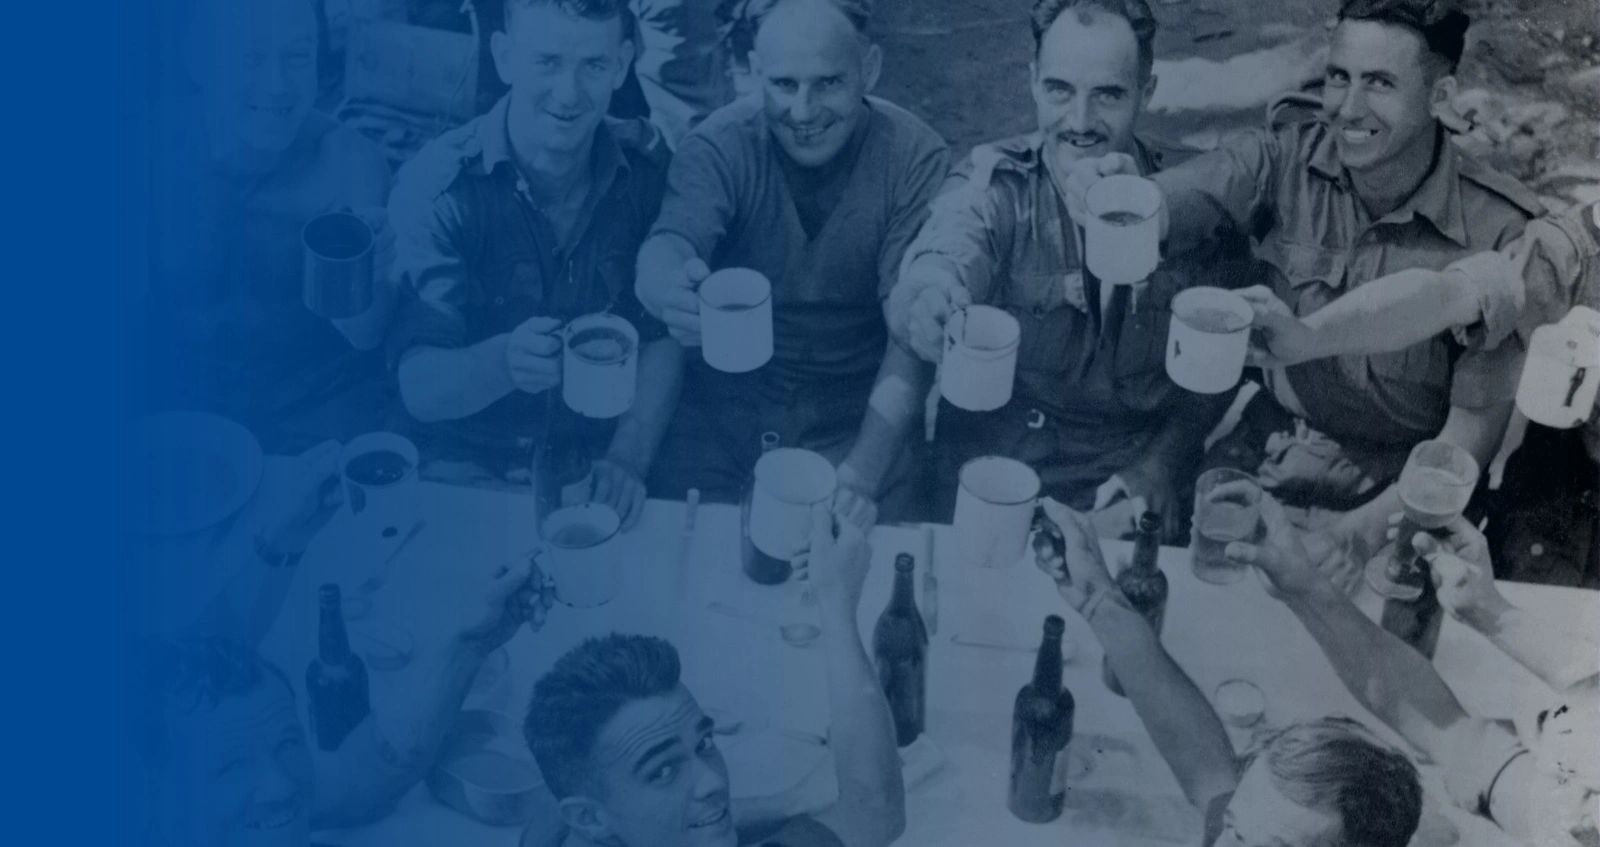 SEAC troops having a drink at a camp bar